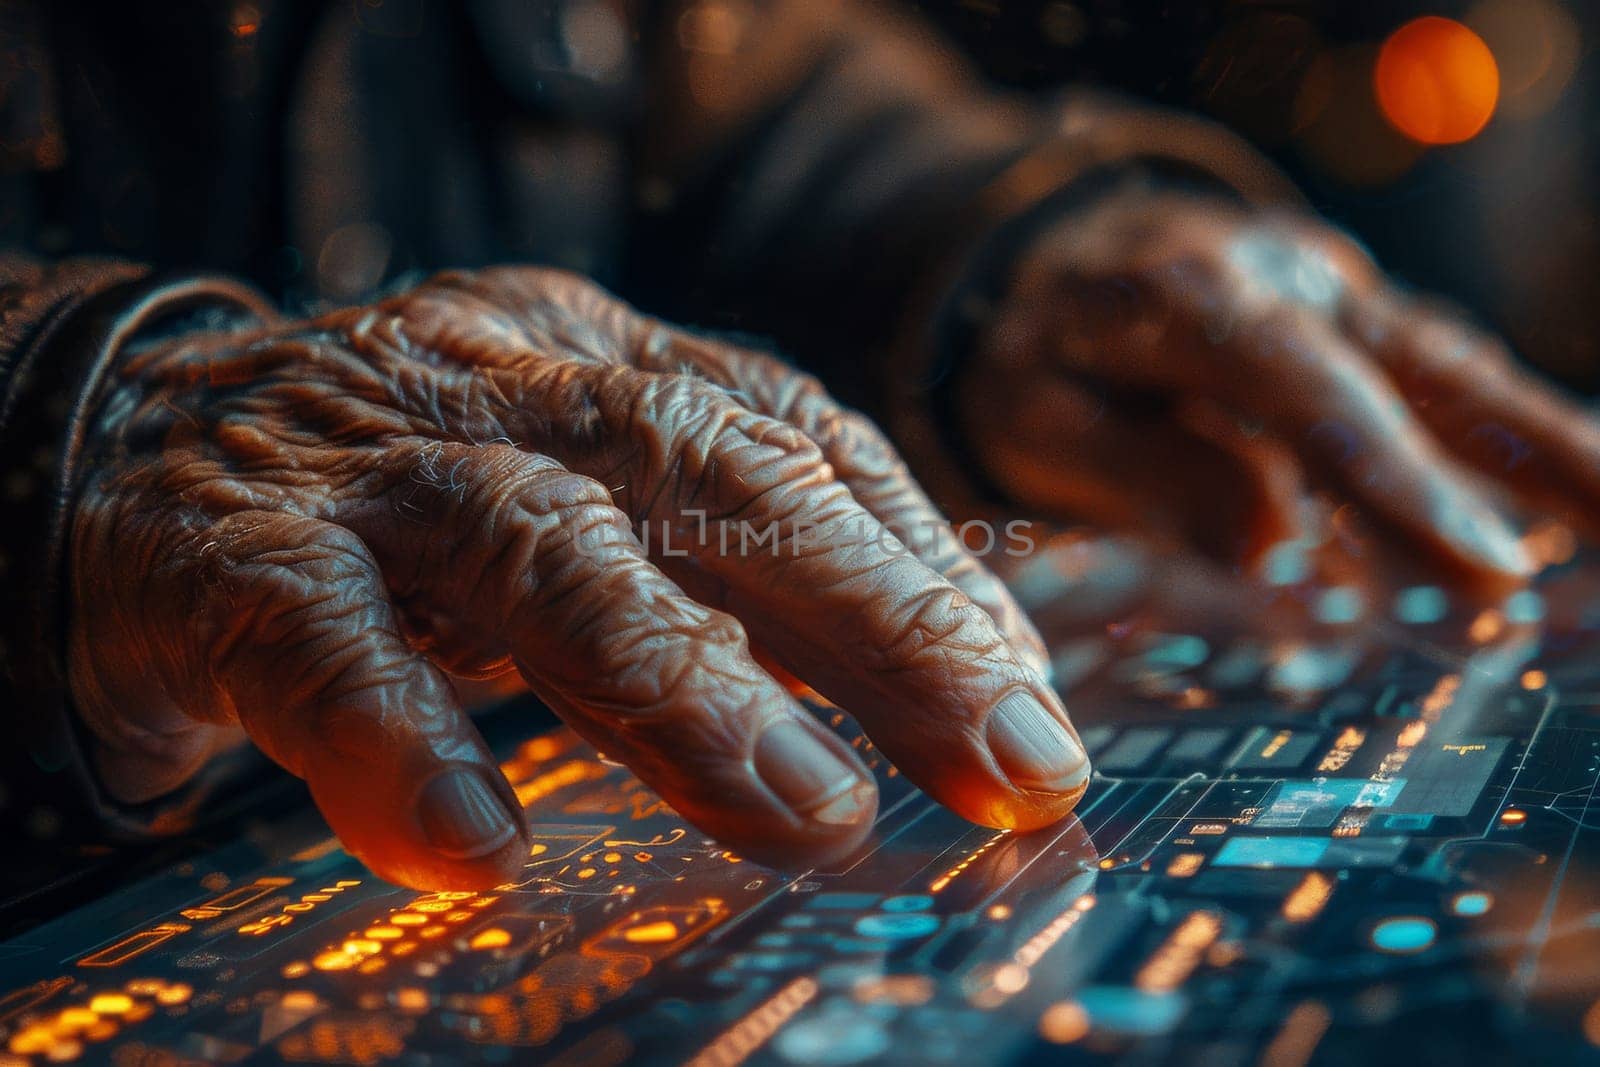 An older man is using a tablet with a finger, and the image has a futuristic by itchaznong